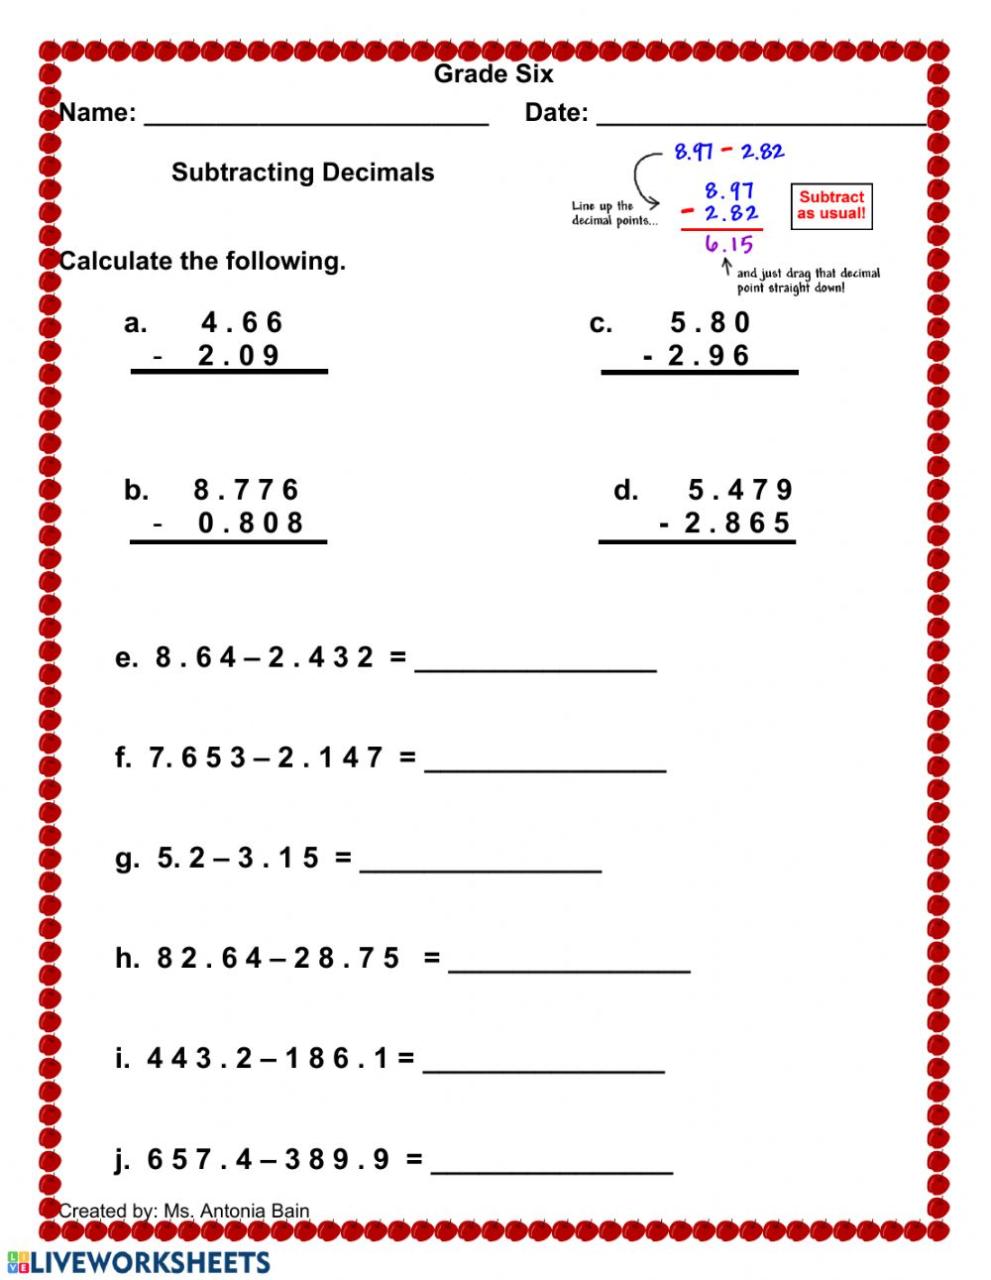 Adding And Subtracting Mixed Numbers Worksheet With Answers